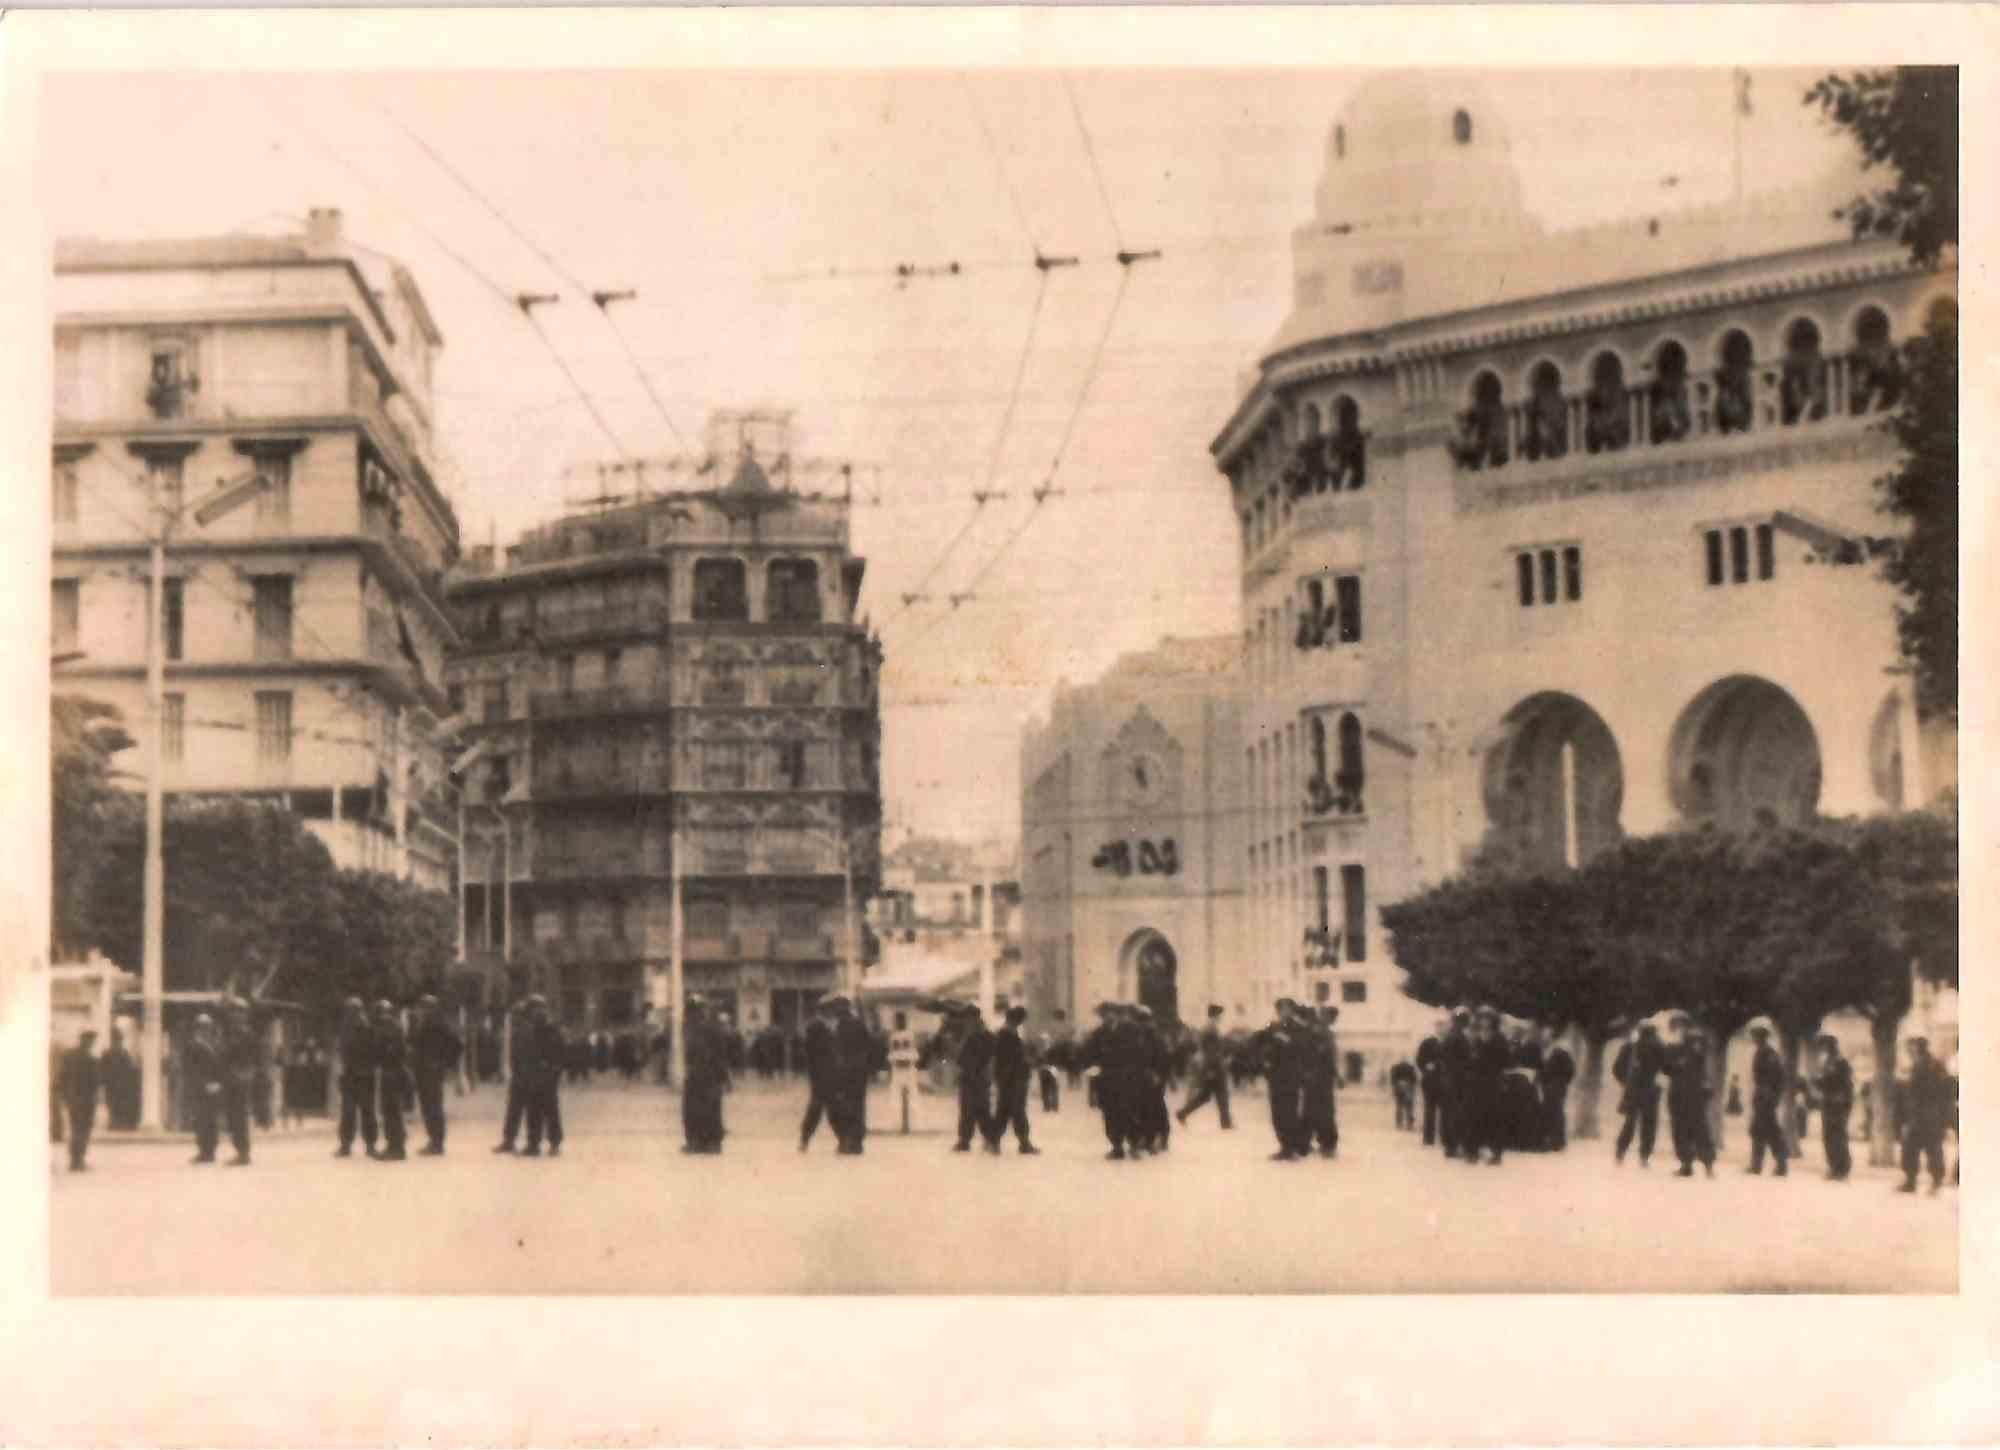 Unknown Landscape Photograph - Algeria, the Post Office Surrounded by Police - Vintage photo - Mid-20th Century